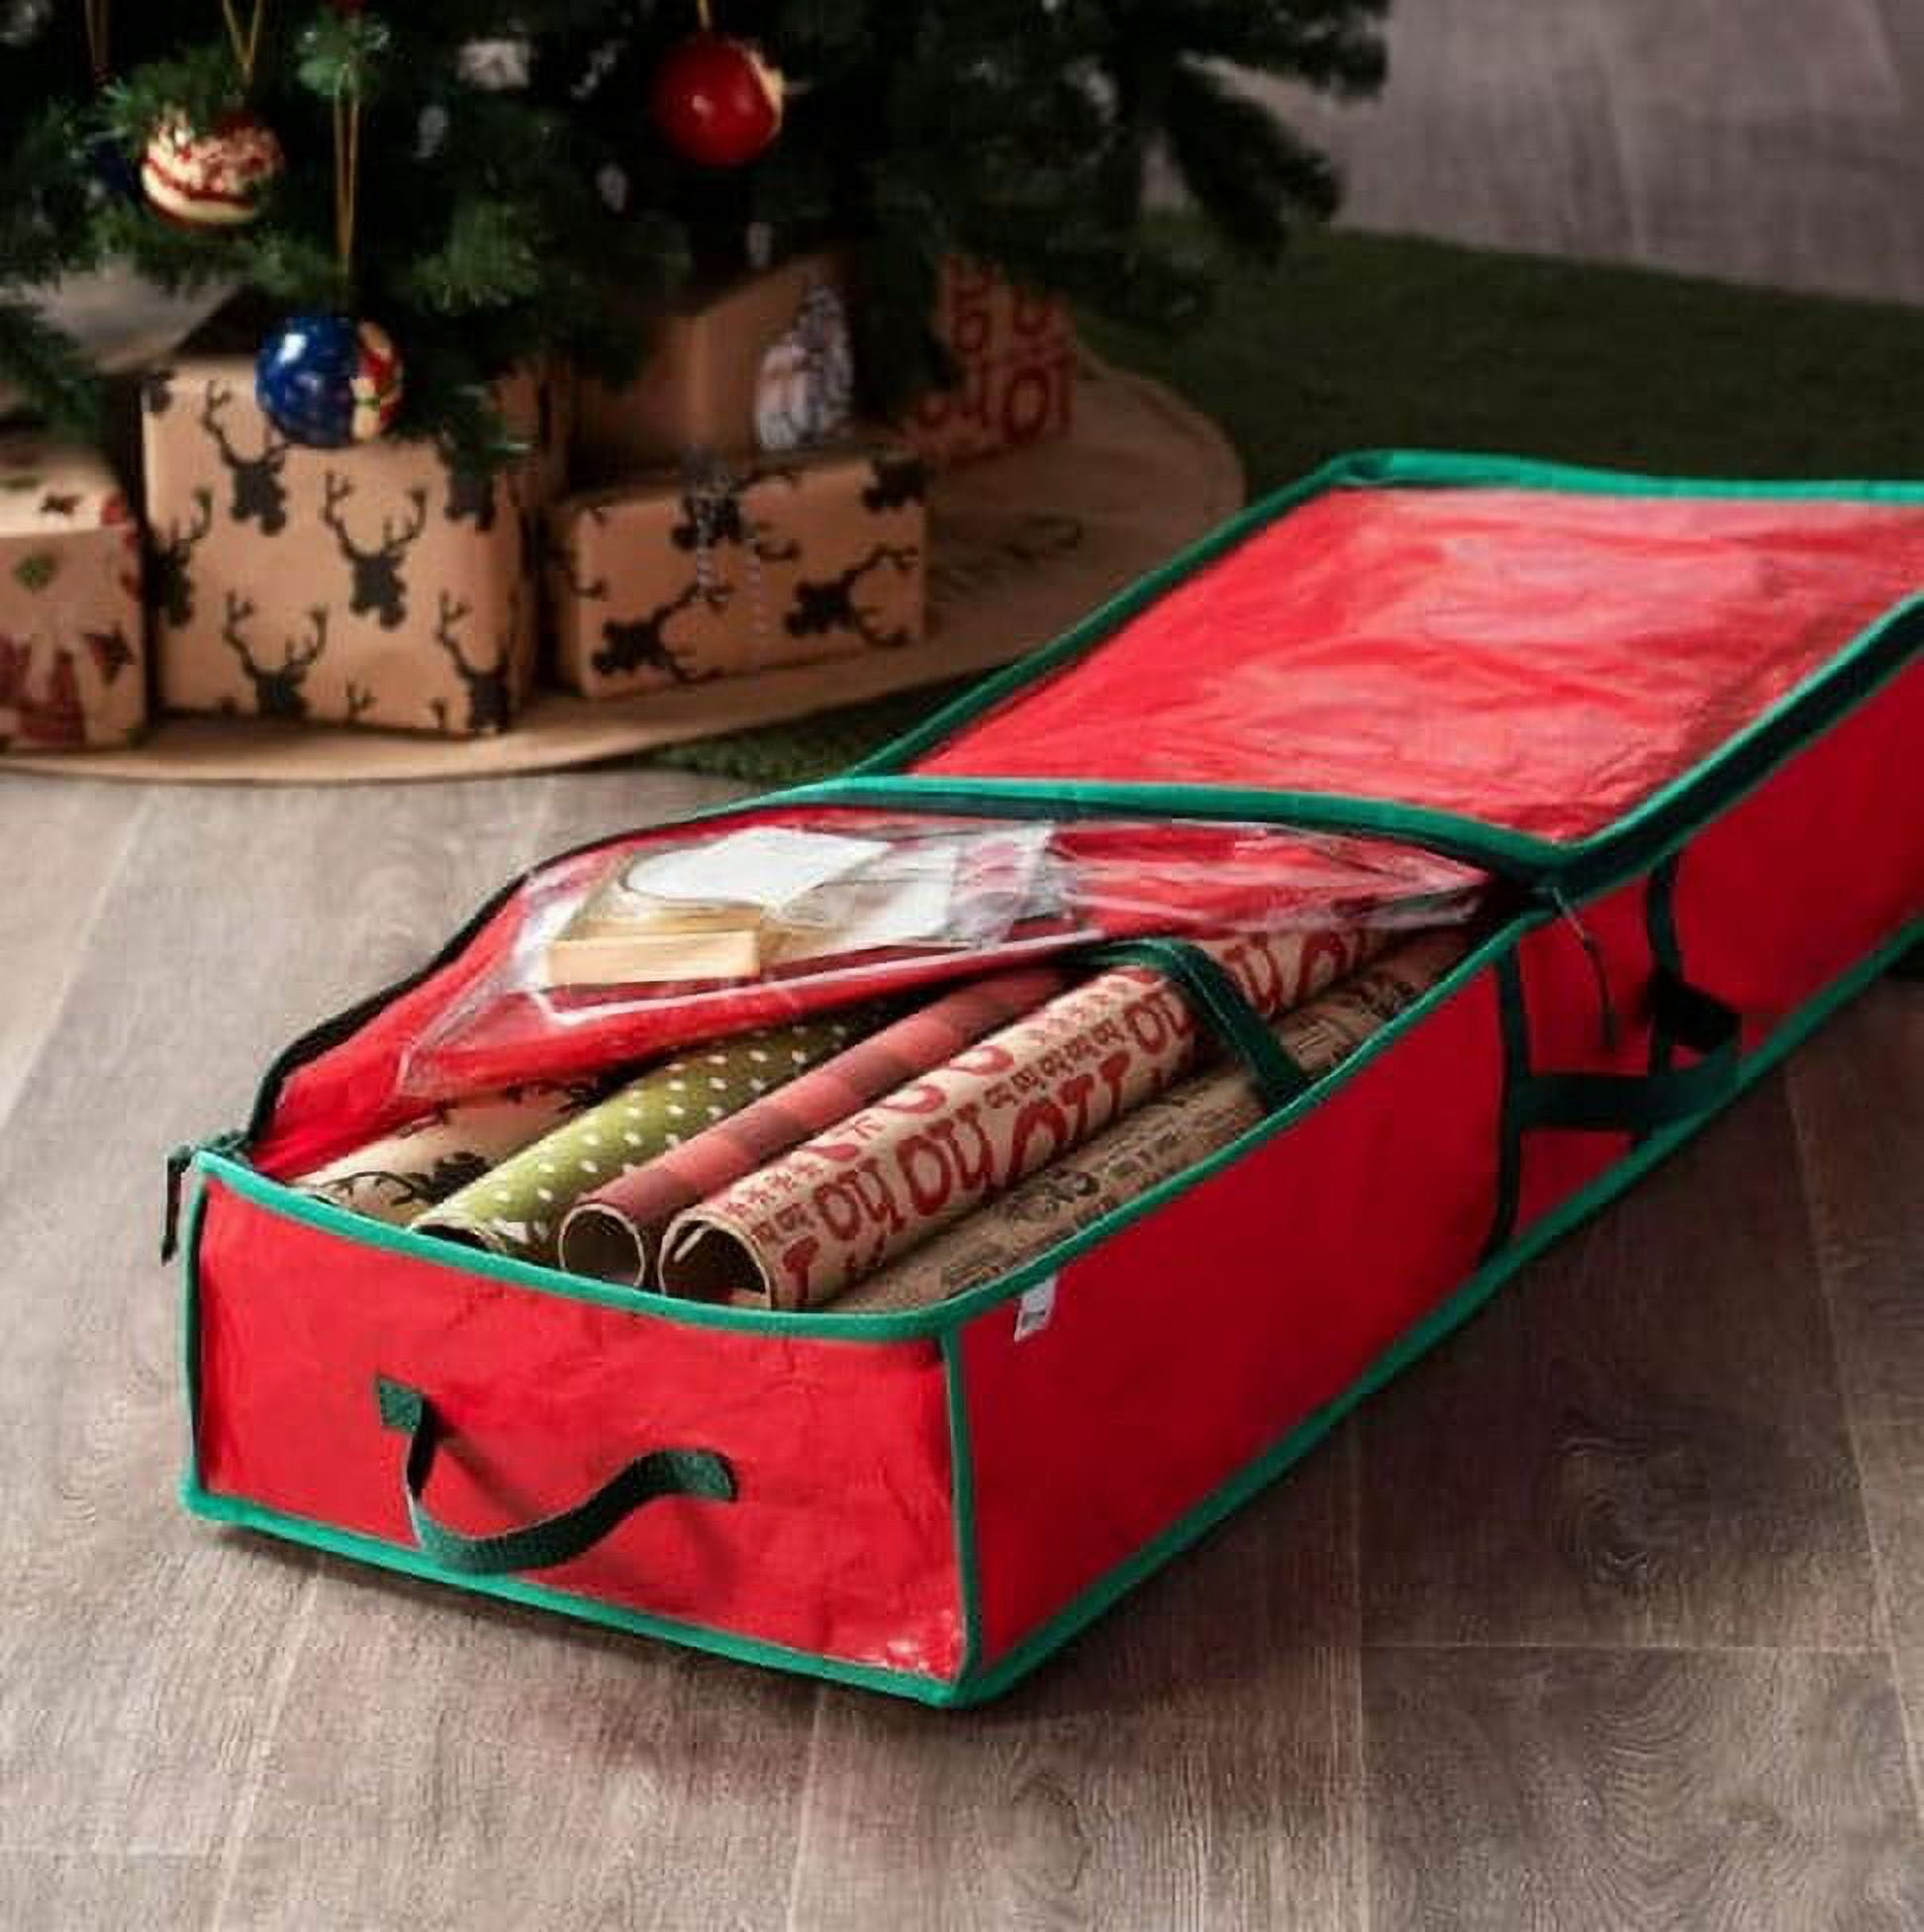 Hearth & Harbor Wrapping Paper Storage Organizer Container - Christmas  Wrapping Paper Rolls Storage, Under-Bed Storage Box for Holiday Storage &  Accessories - Gift Wrap Storage Organizer Box 